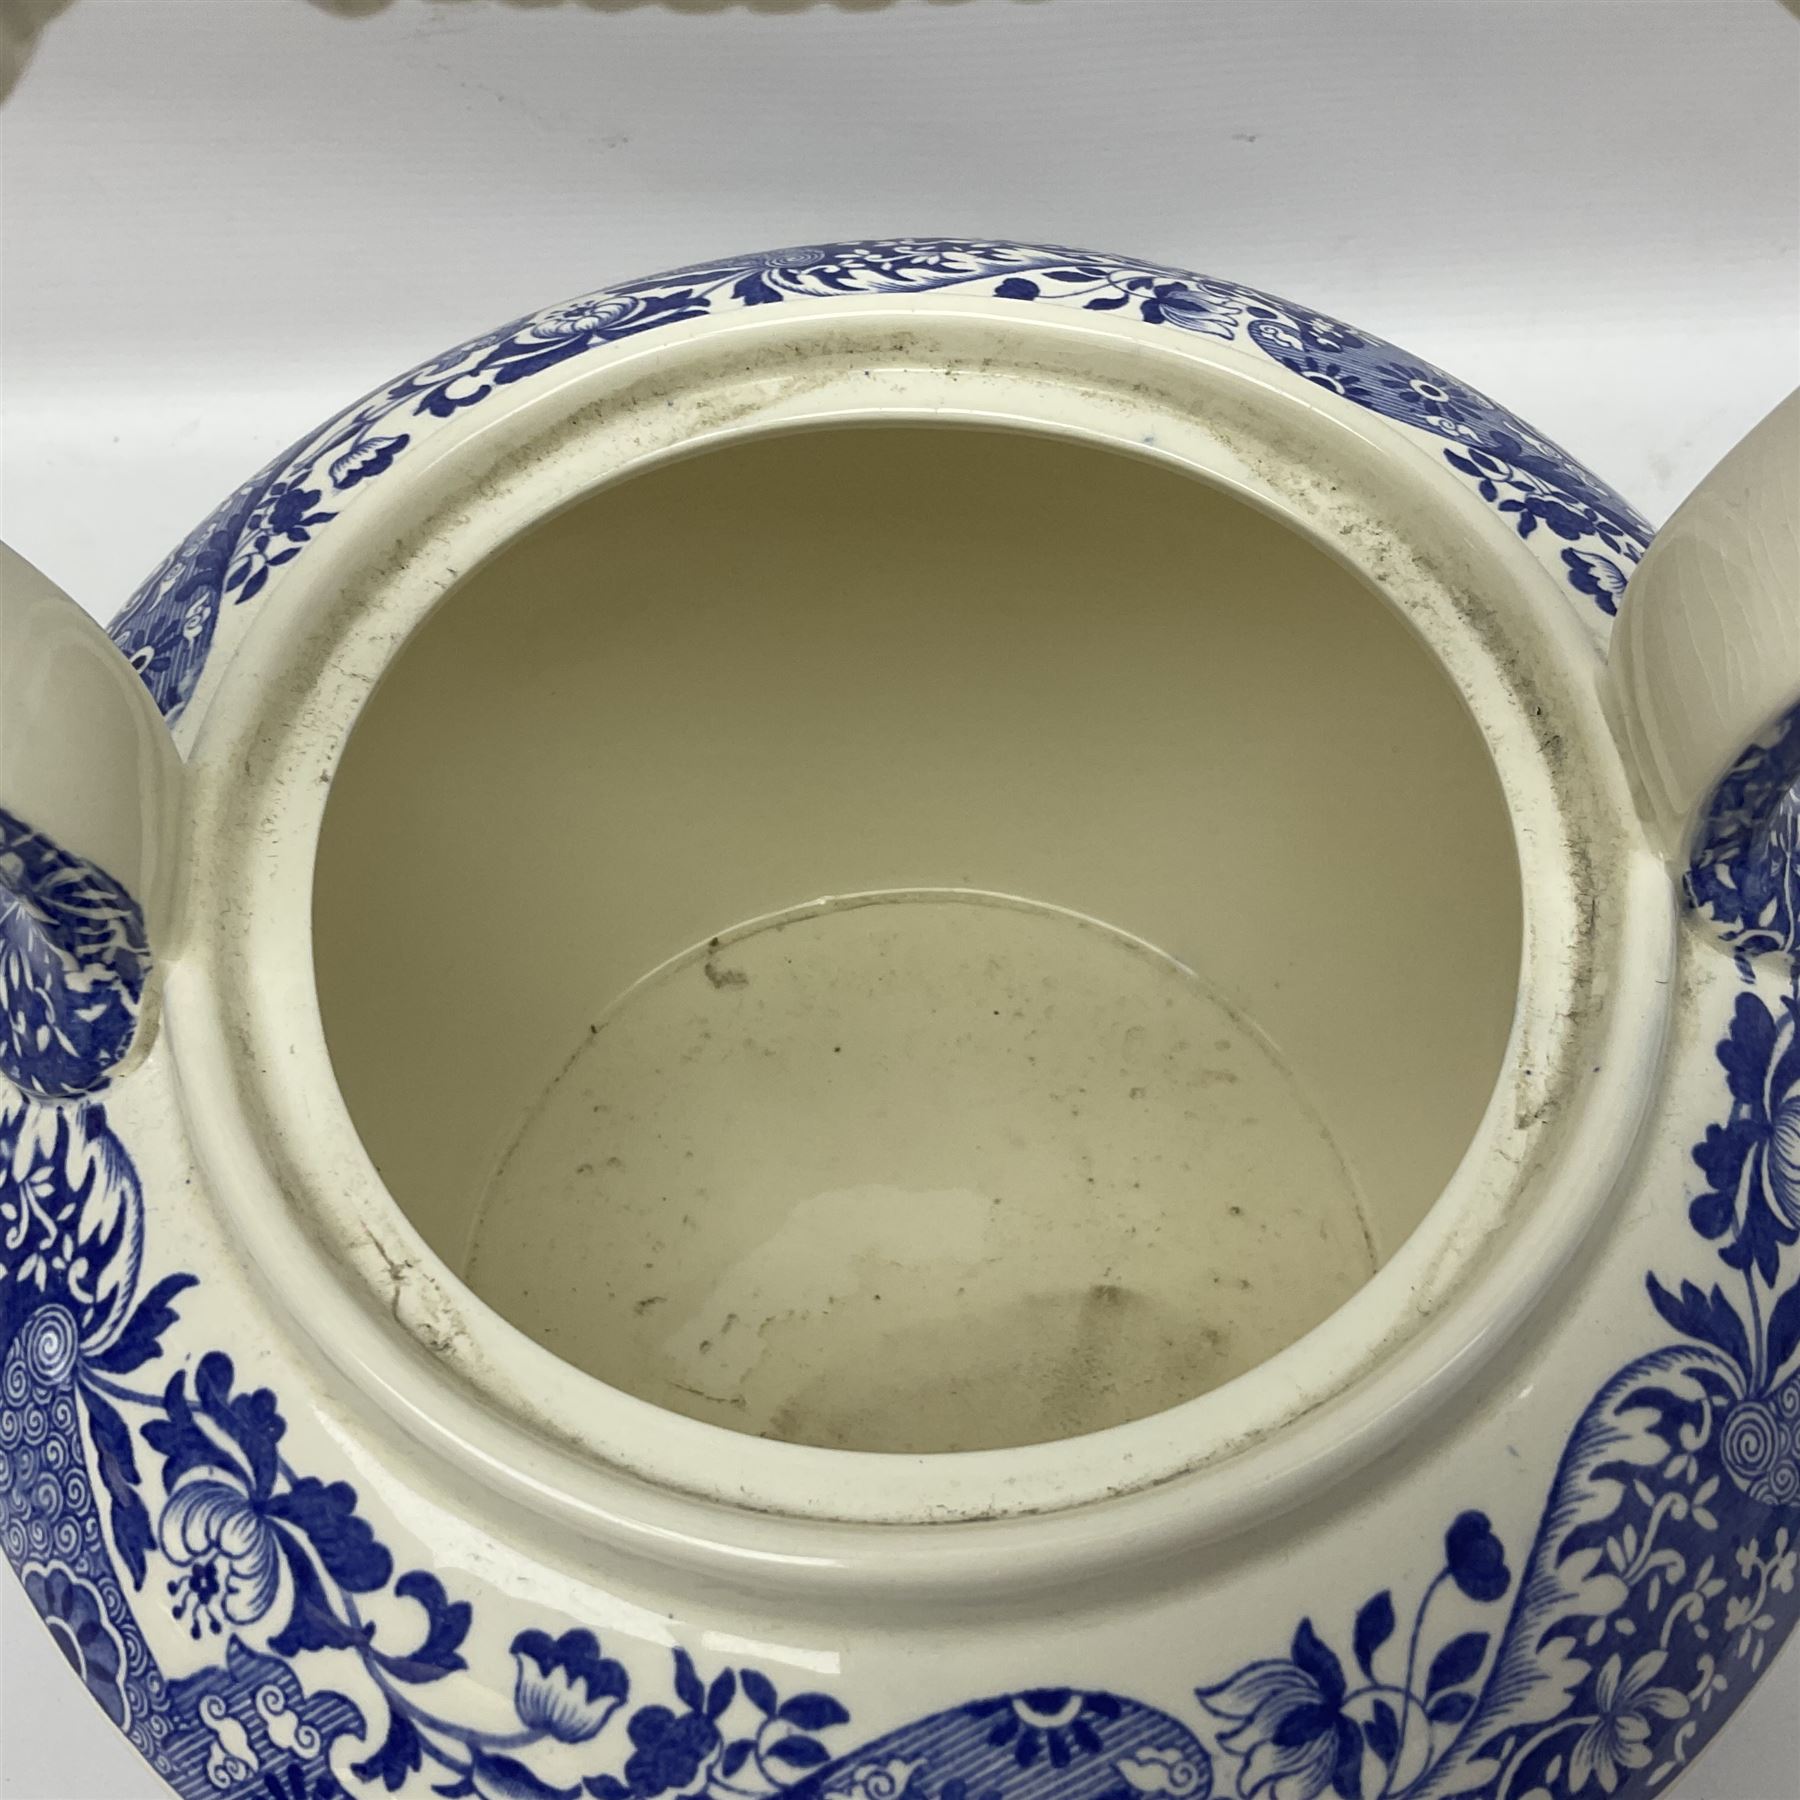 Spode blue and white kettle - Image 4 of 12